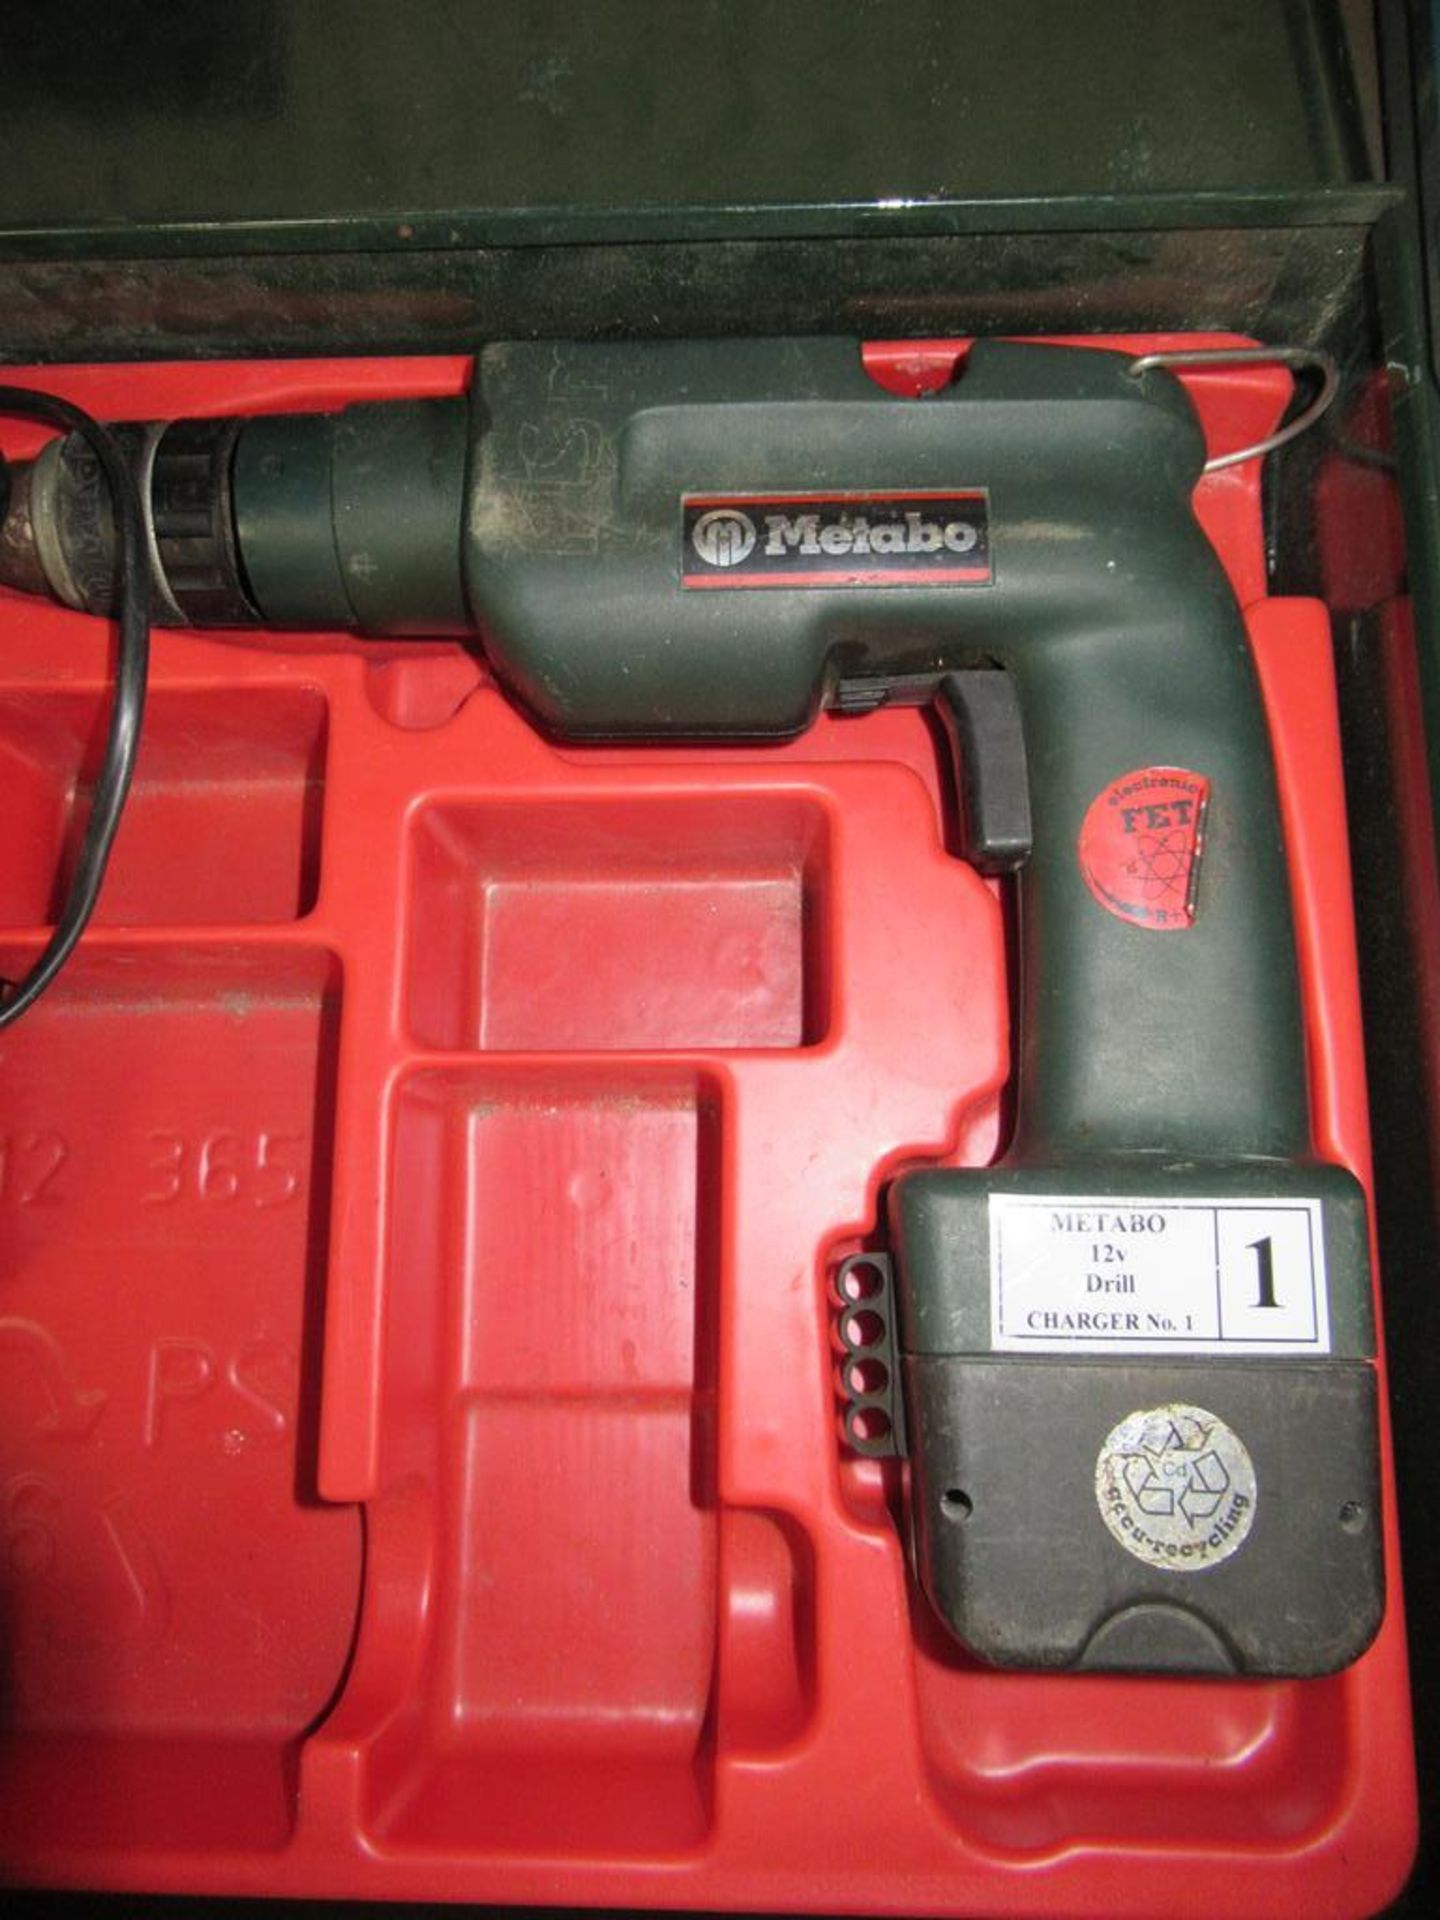 Metabo BEAK 92/R cordless drill with charger in case - Image 2 of 3